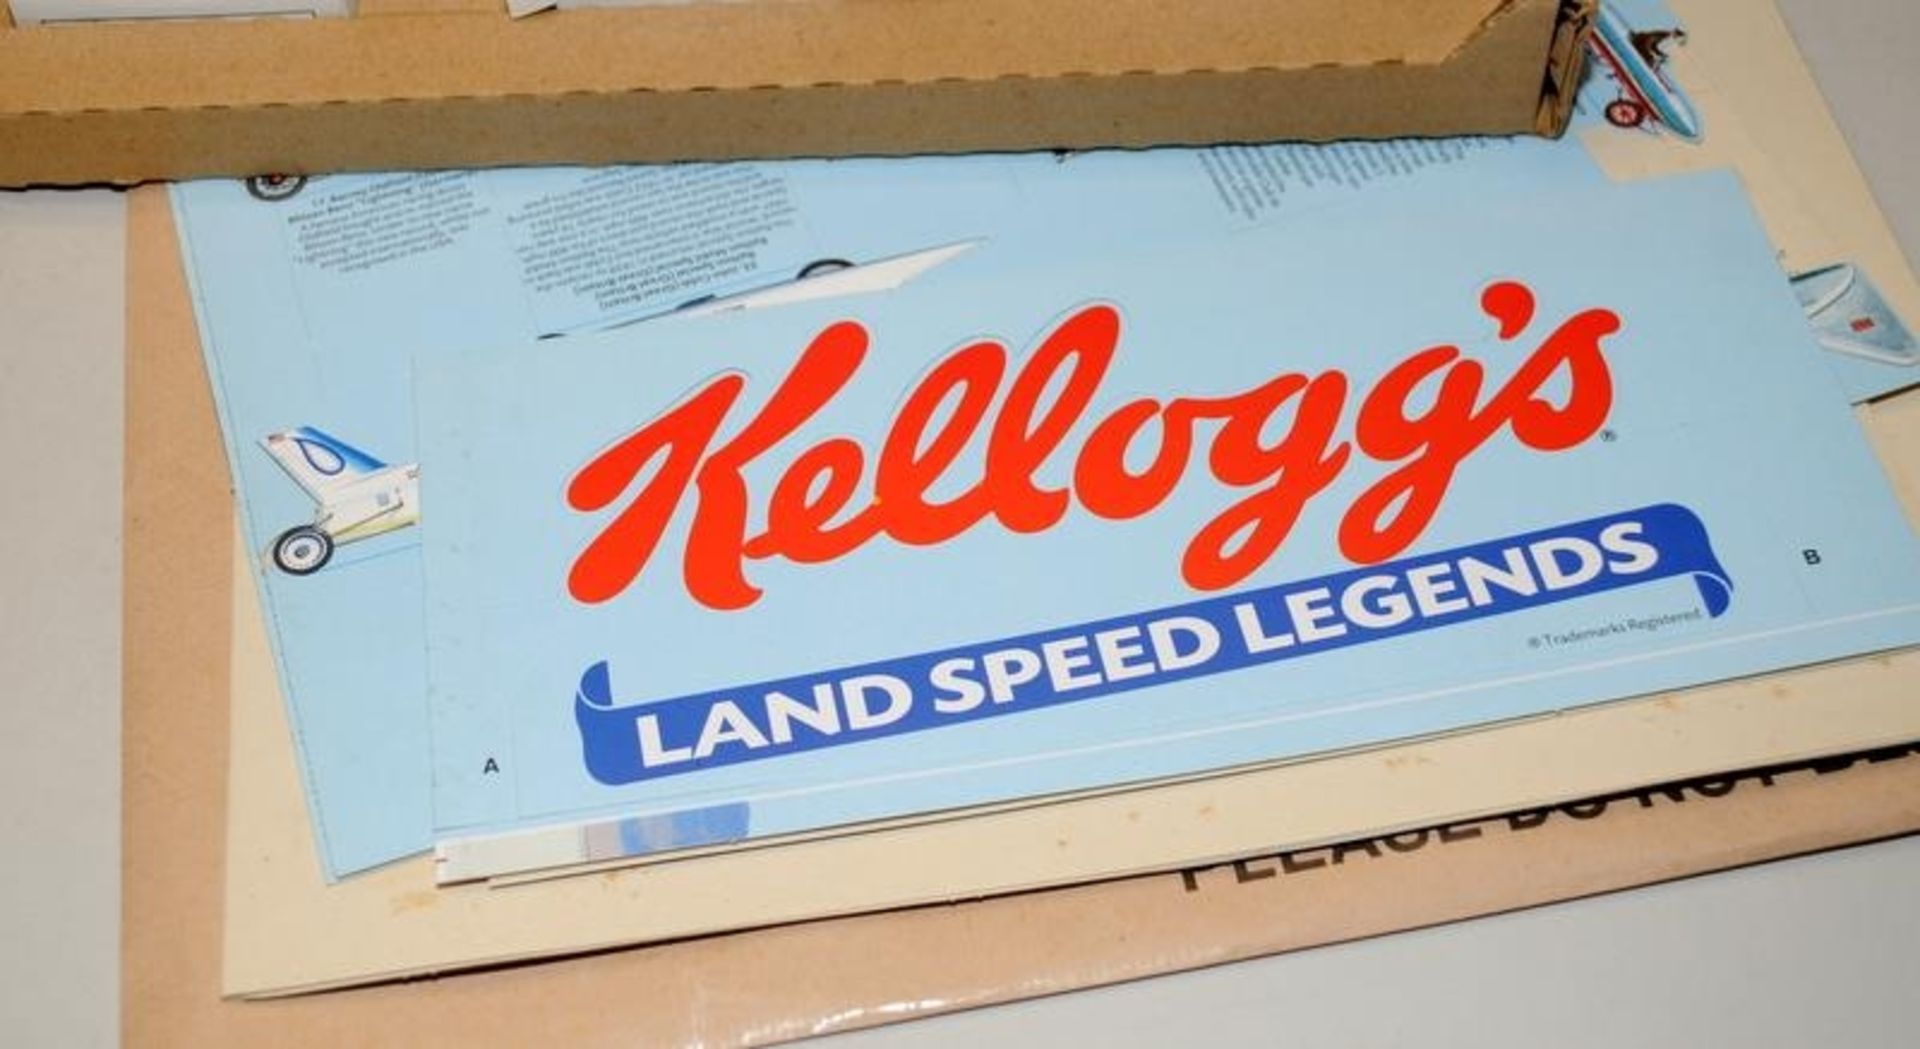 Lledo Kelloggs Land Speed Legends model car set c/w wall charts, press out card displays etc - Image 3 of 6